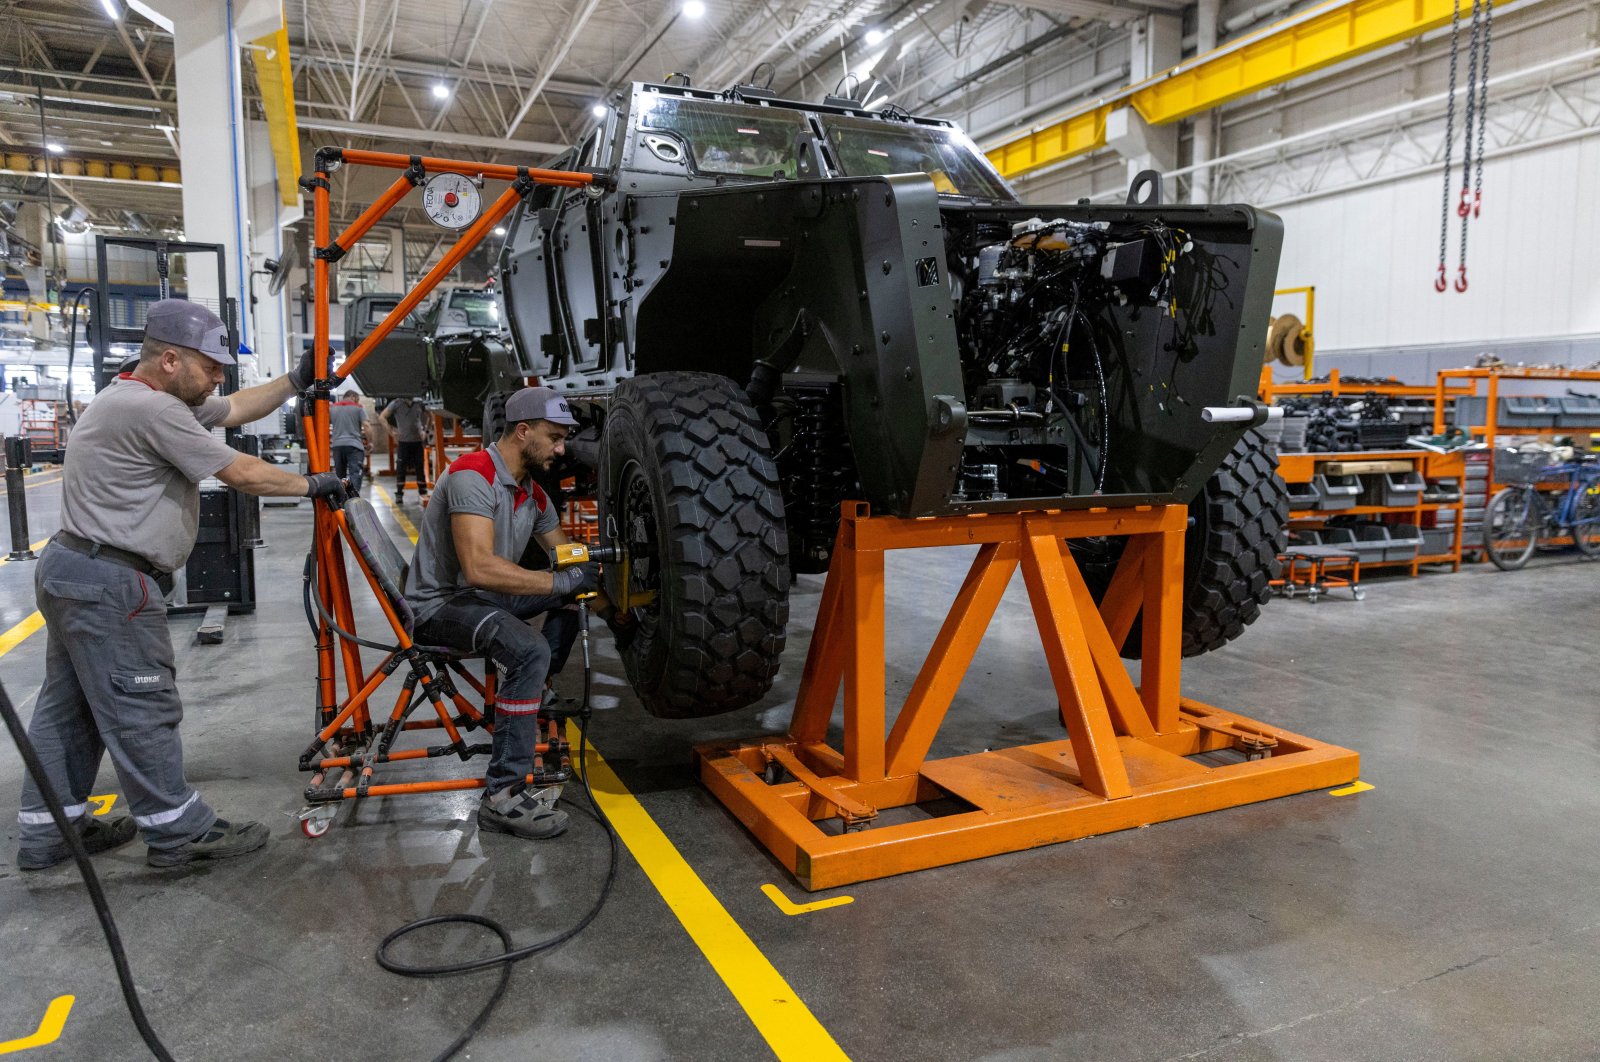 Technicians work on a Cobra II, an armored personnel carrier, at a production line at the heavy commercial and armored vehicle manufacturer Otokar factory in Arifiye, Sakarya province, northwestern Türkiye, July 13, 2023. (Reuters Photo)